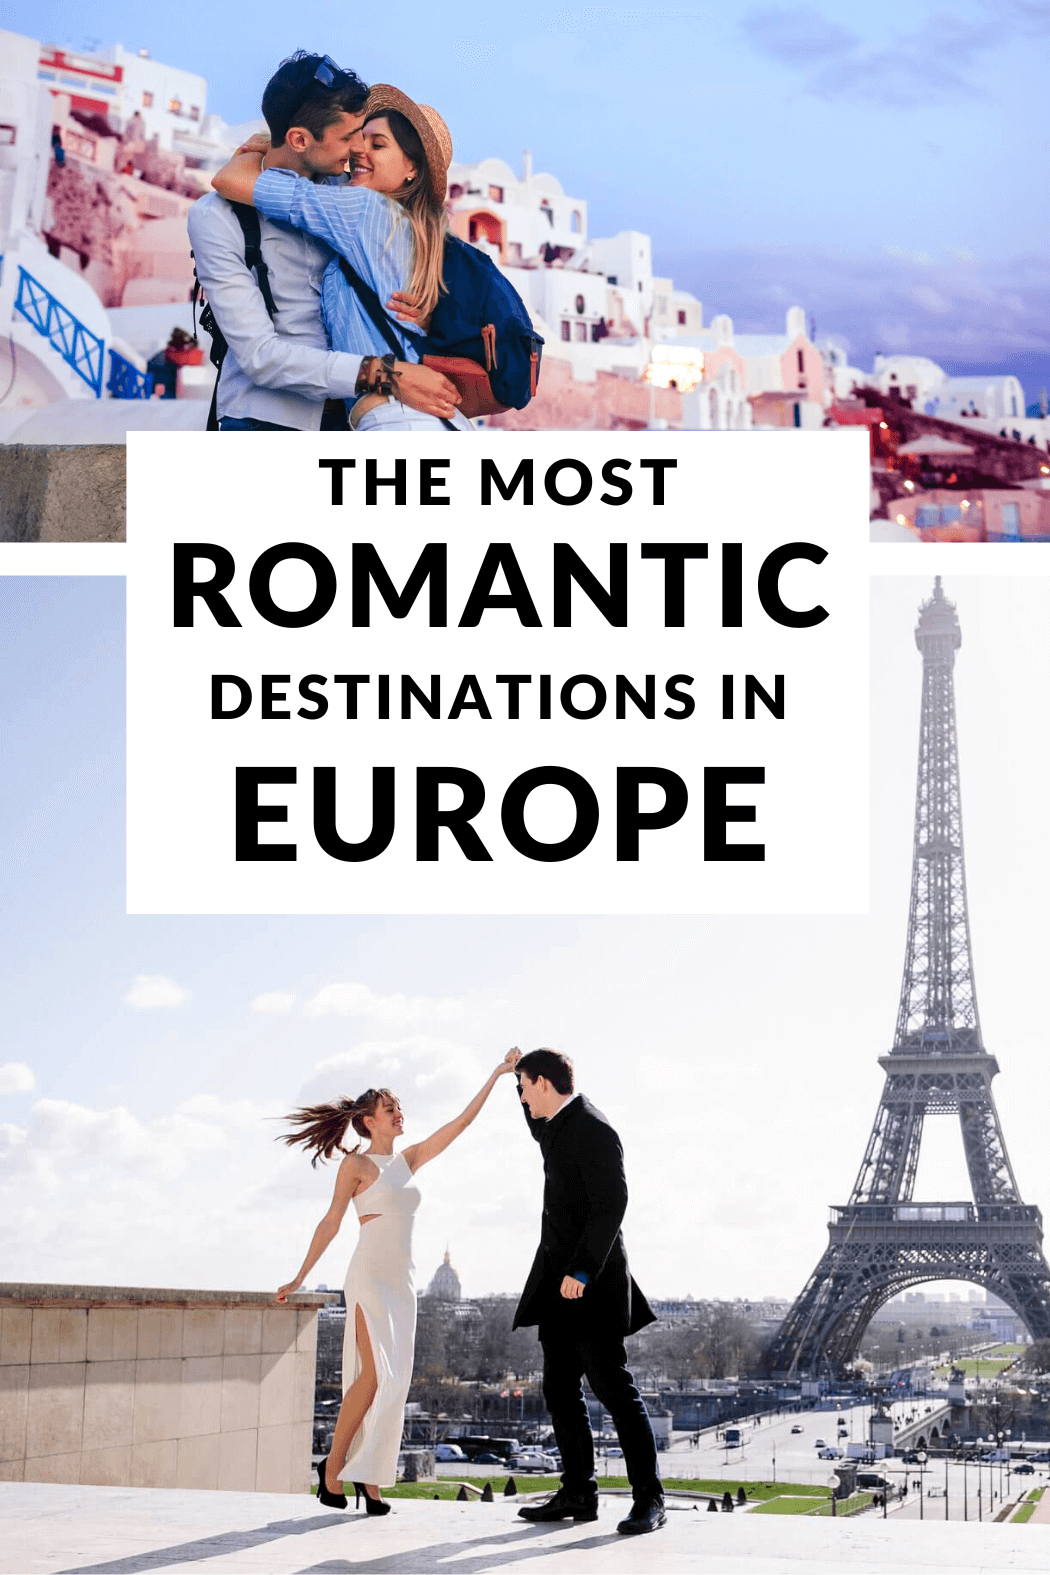 Looking for romantic destinations to sweep your partner off their feet and create new romantic memories to last a lifetime? Here are the most romantic places in Europe to put on your bucket list.